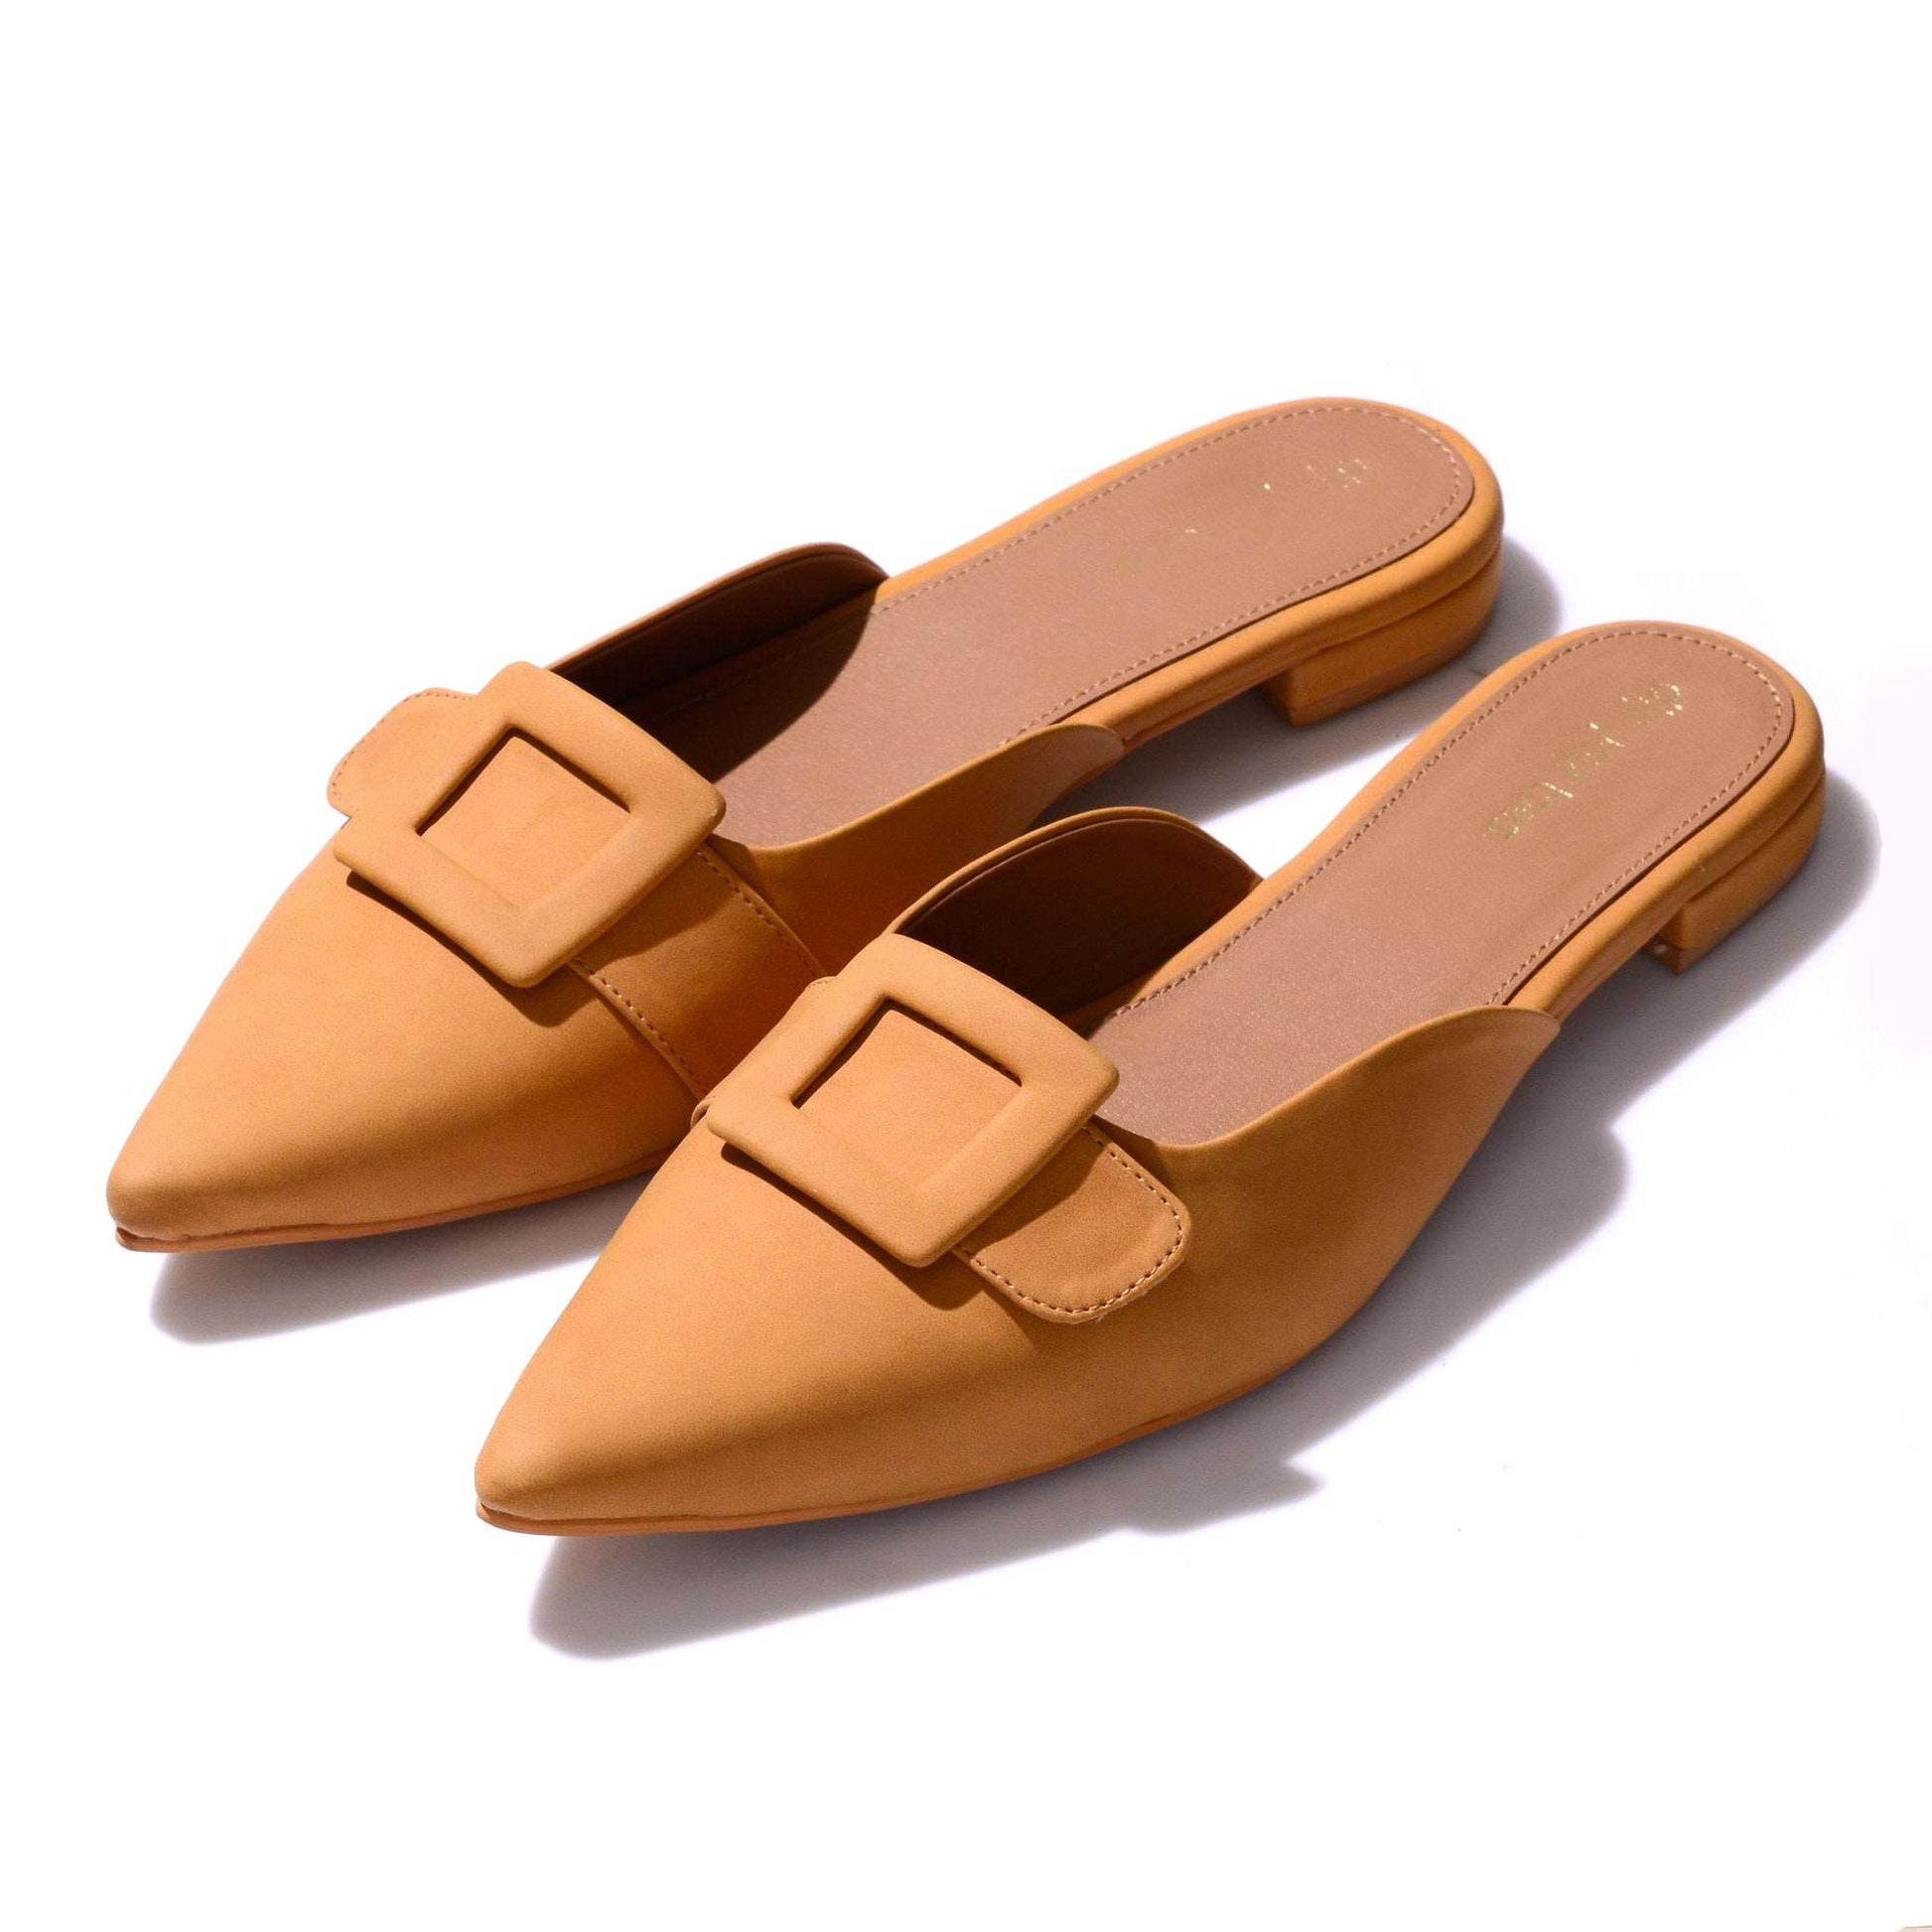 Marigold Buckled Mules